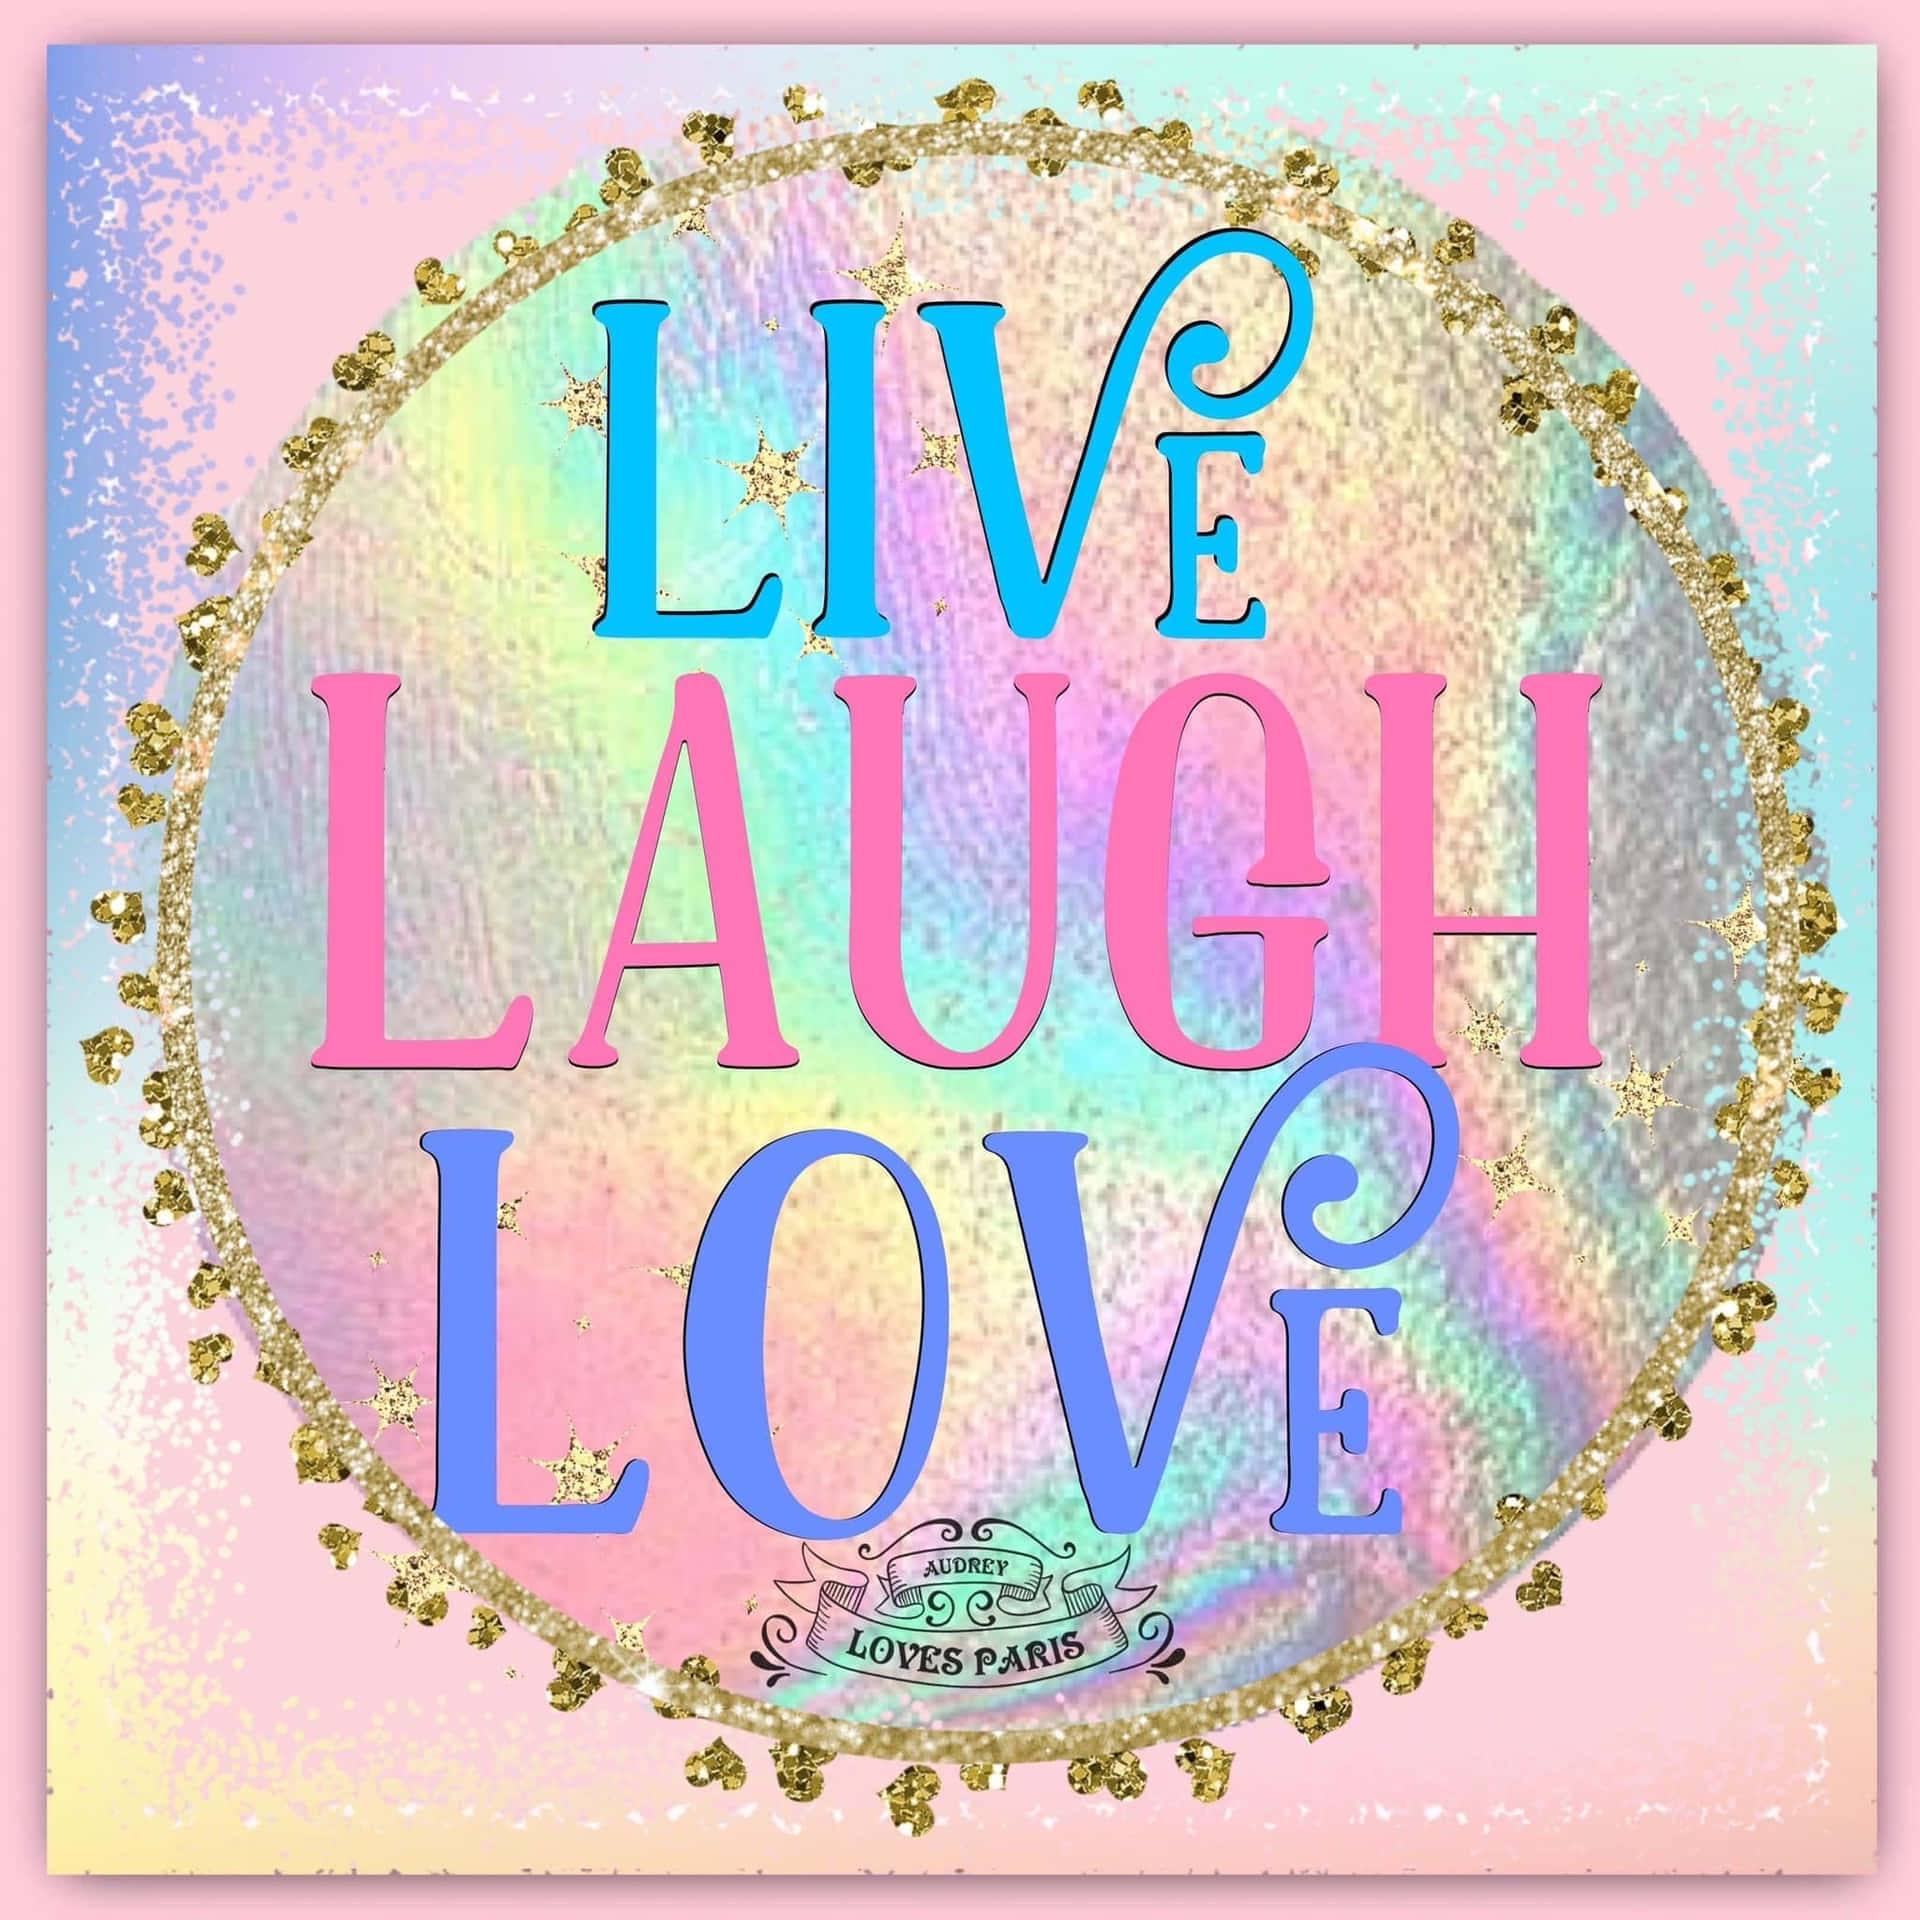 Live your life with passion, Joy and Love. Wallpaper